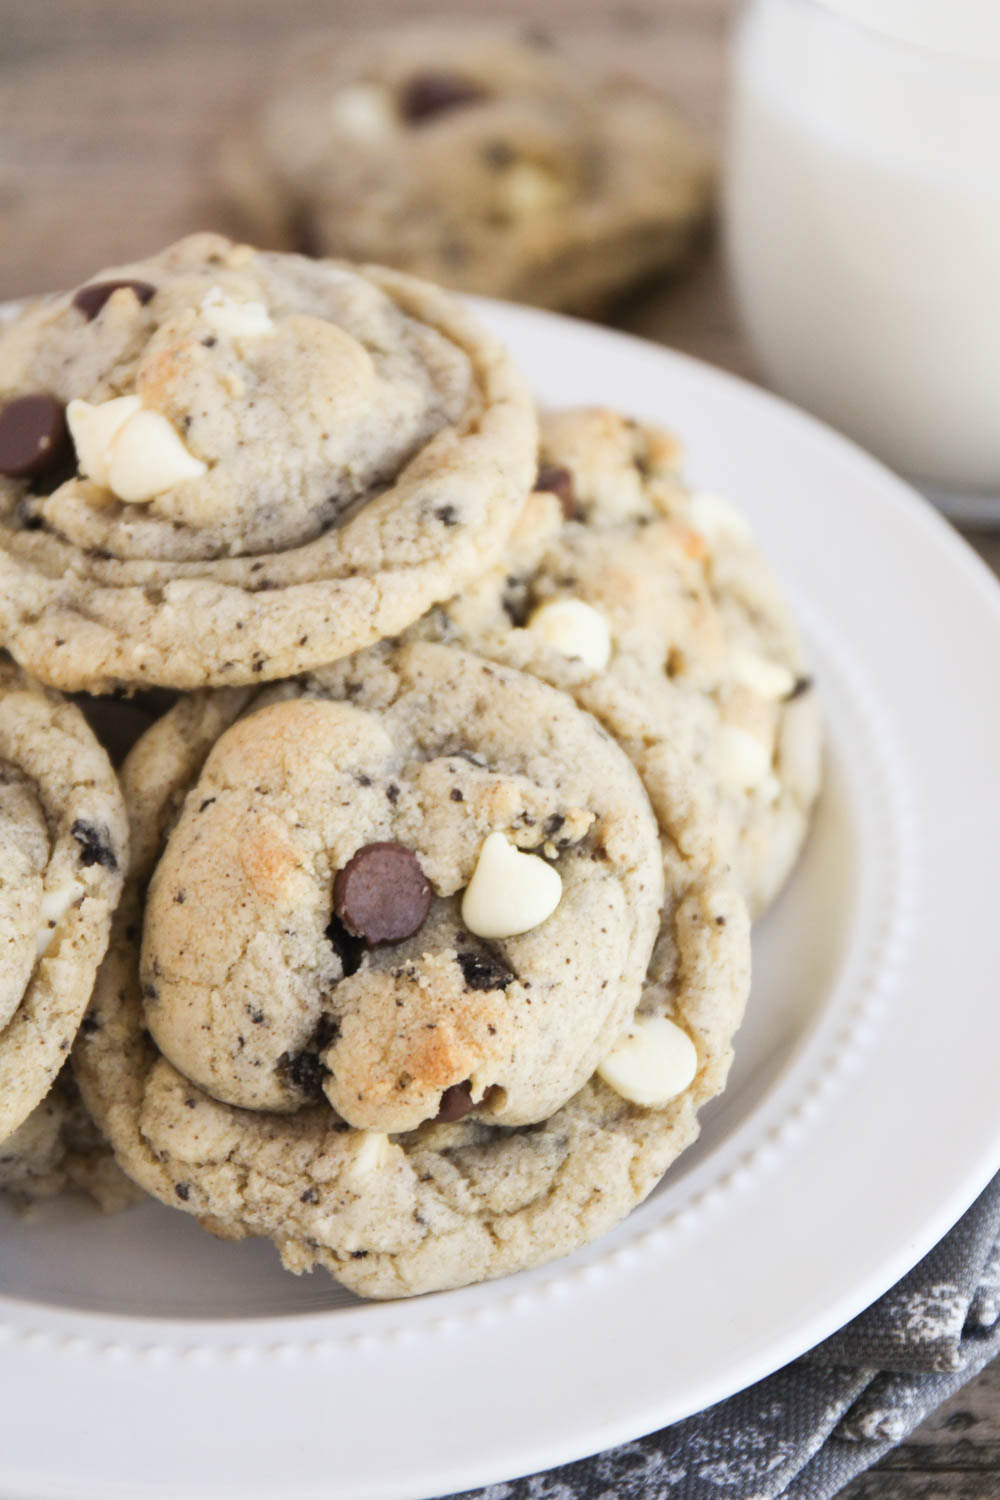 These Oreo chocolate chip cookies are super delicious and easy to make!